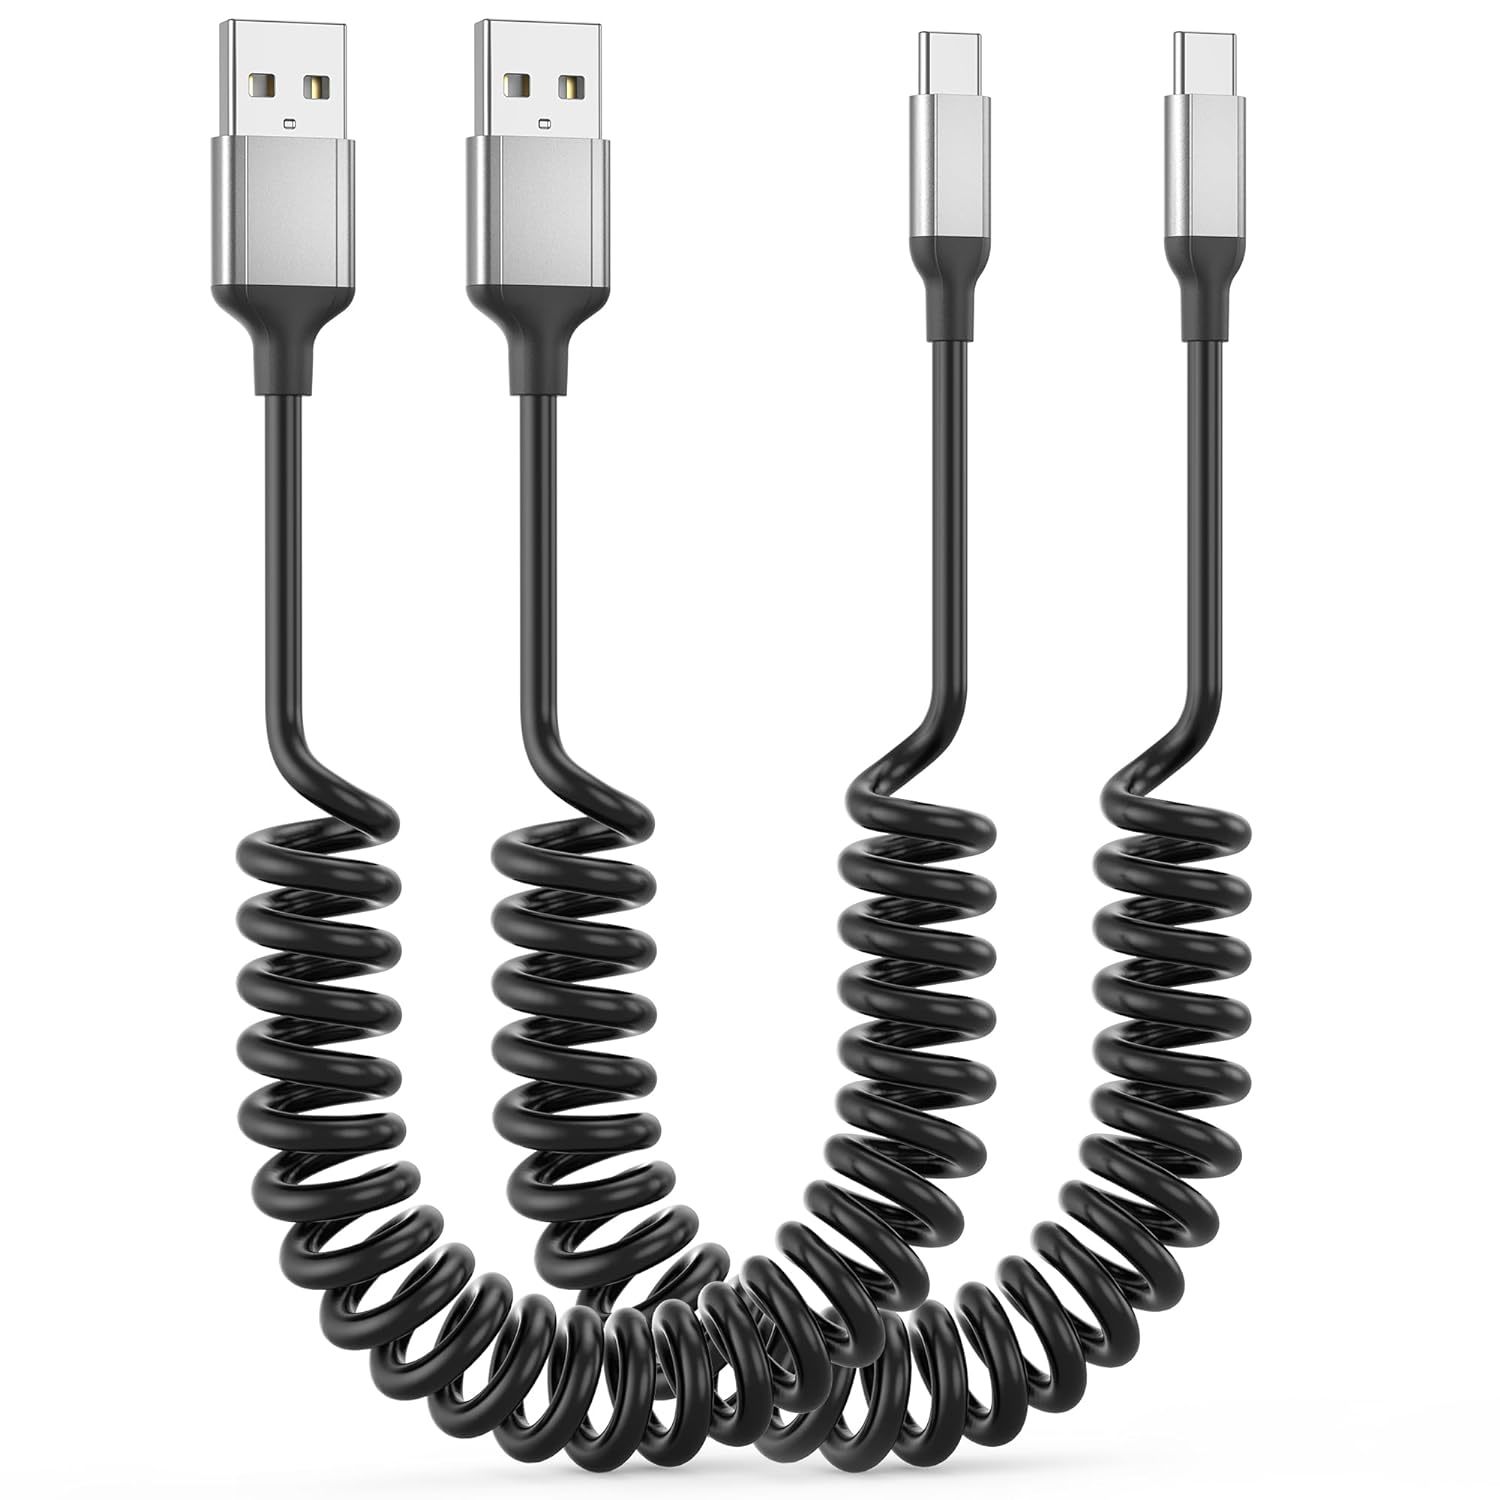 Primary image for Coiled Usb C Cable For Car 2Pack, 3A Usb Type C Charger Cable Fast Charging, Ret